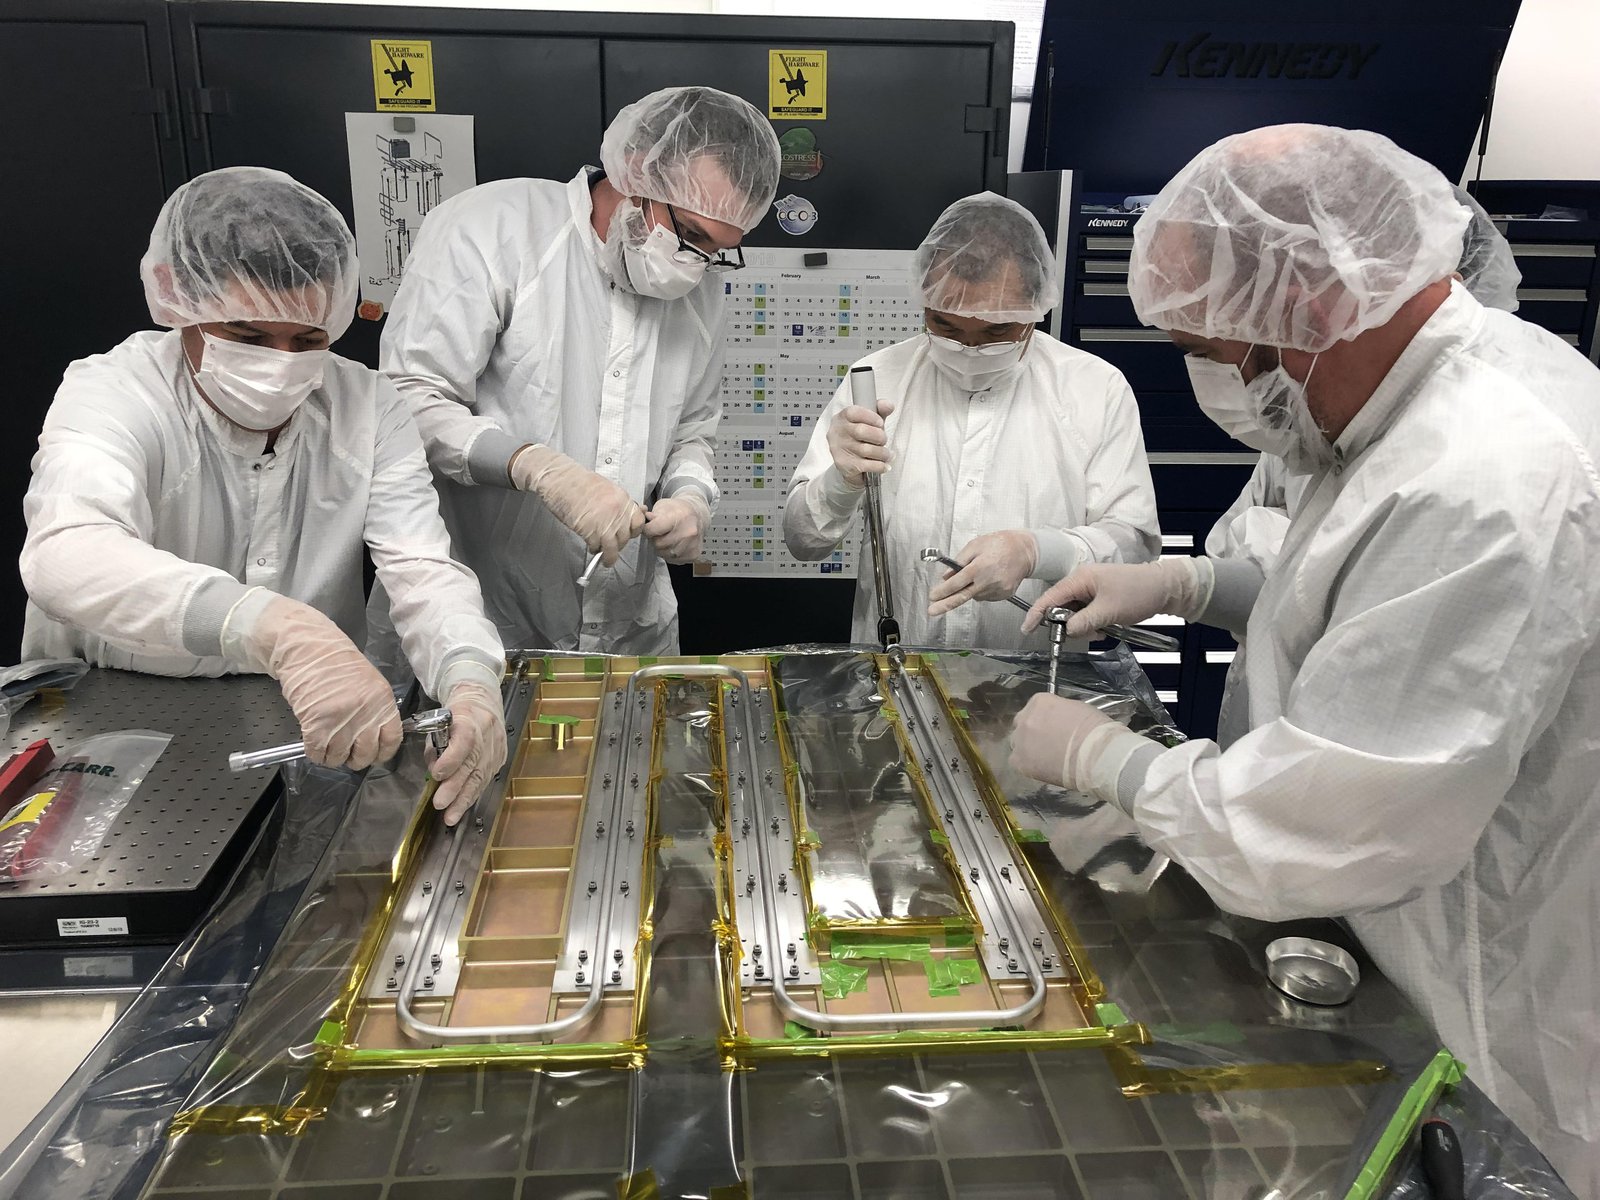 Members of the Europa Clipper team work on the spacecraft’s heat redistribution system at Jet Propulsion Laboratory in 2019.